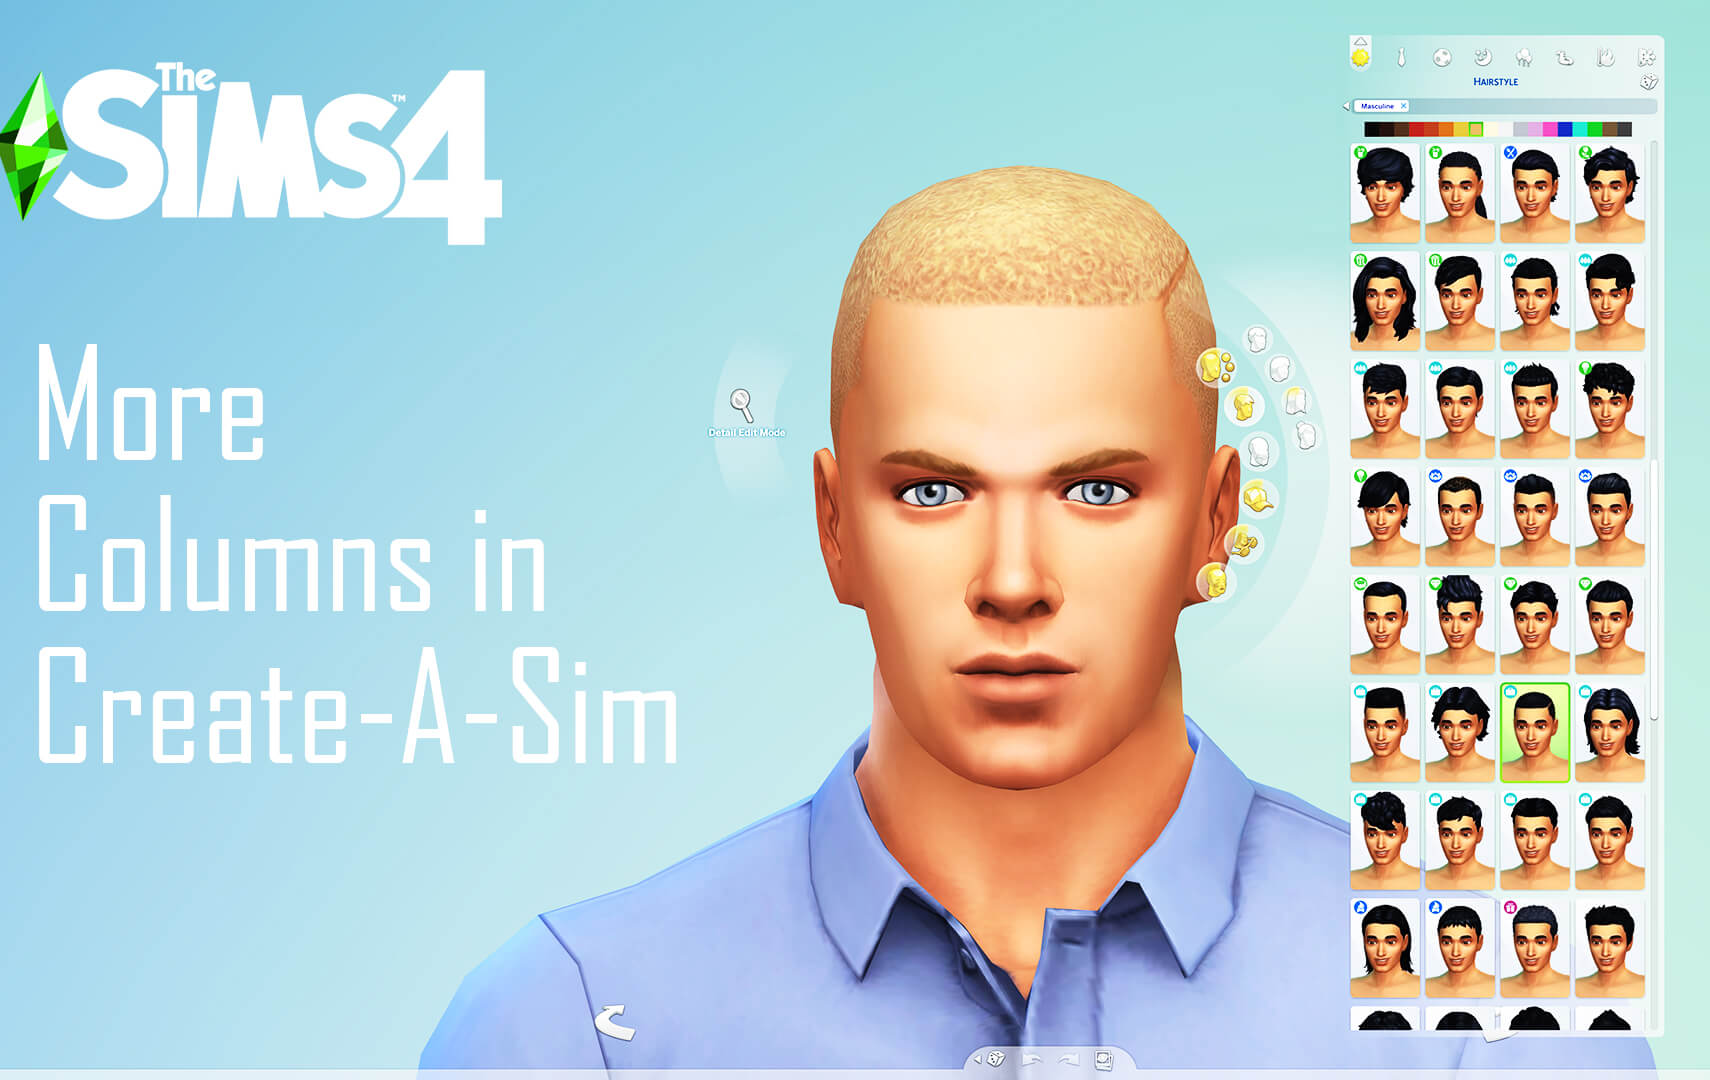 custom content not showing up in sims 4